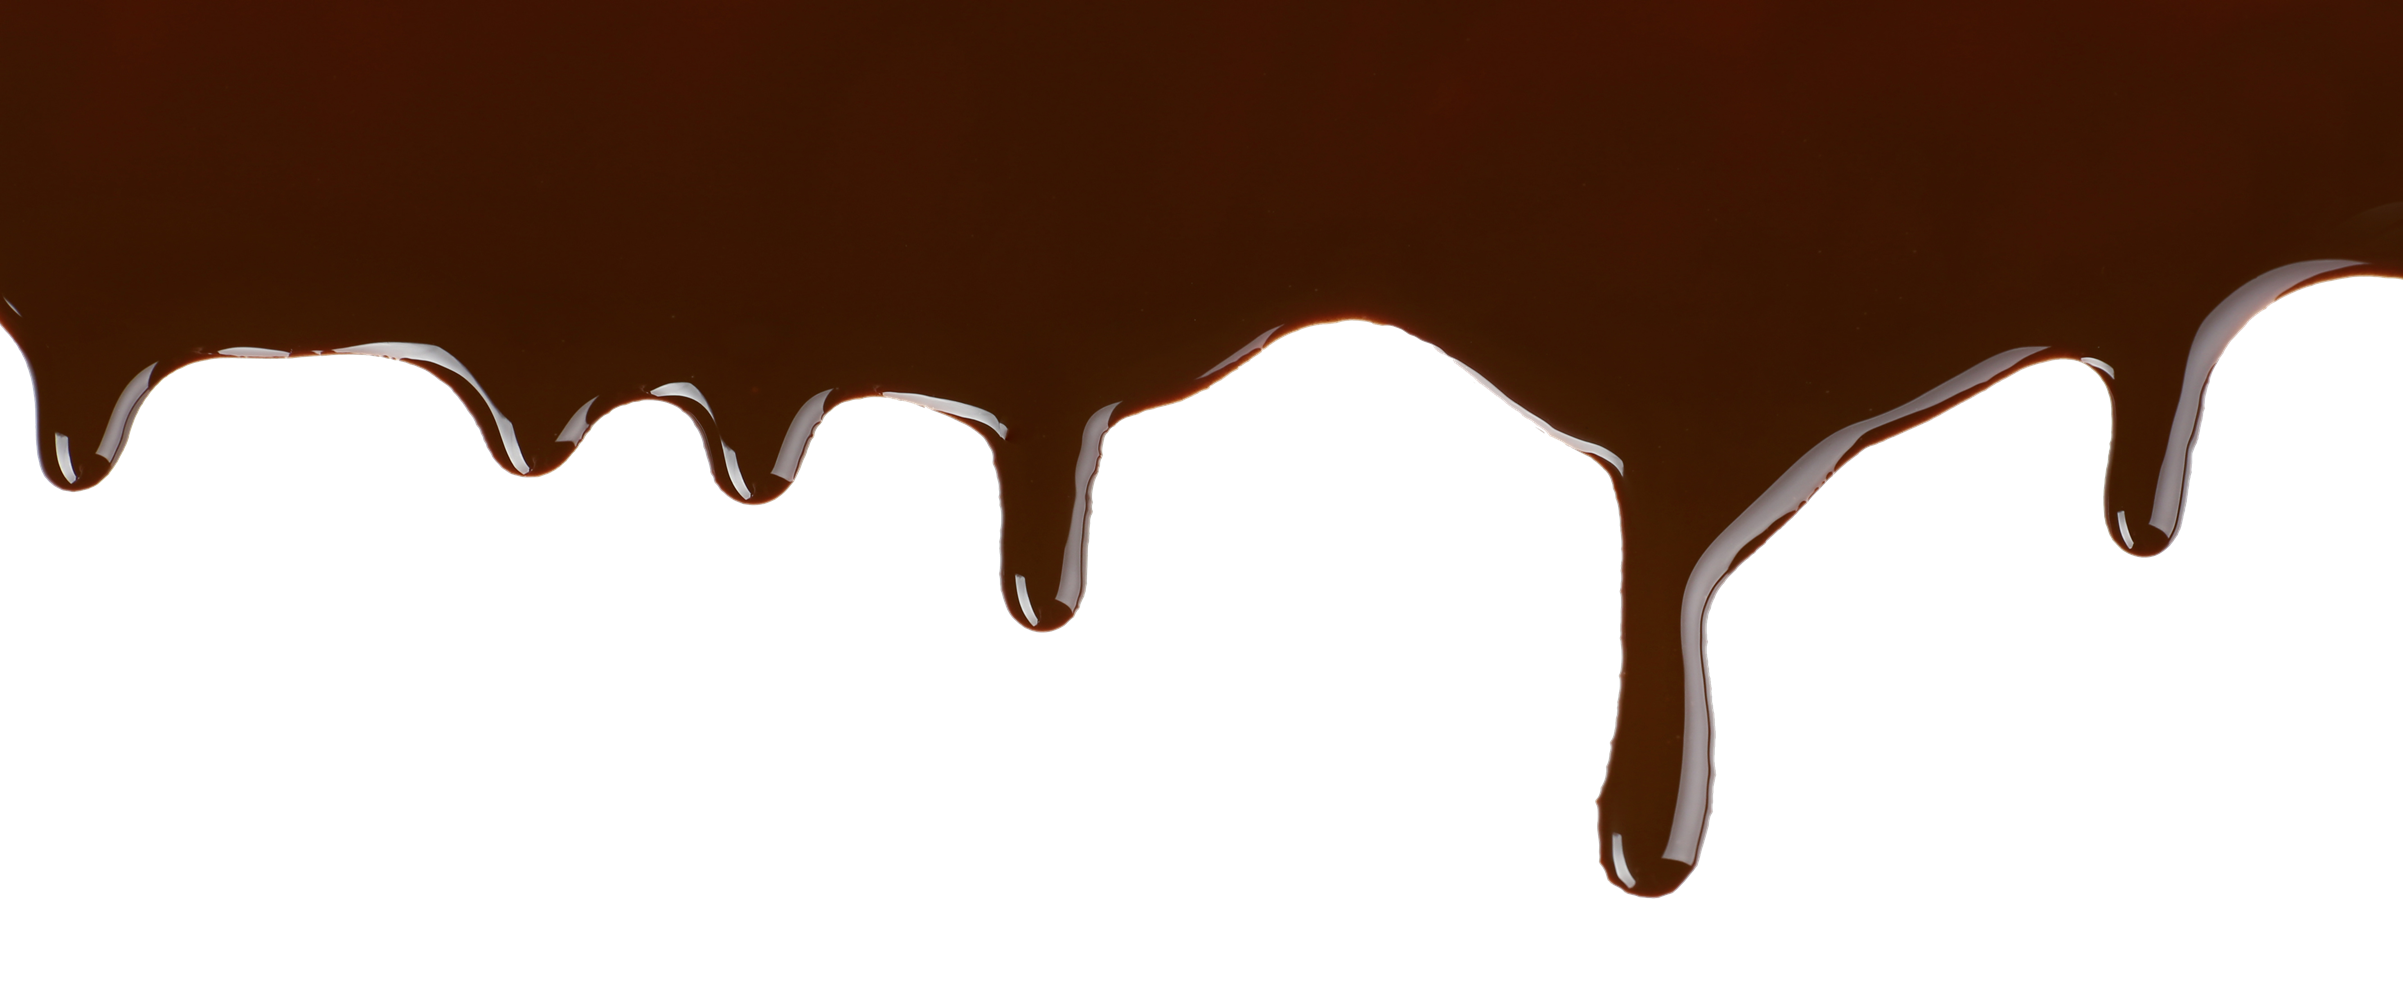 Melted Chocolate Png Image - Melting Chocolate Bar, Transparent background PNG HD thumbnail